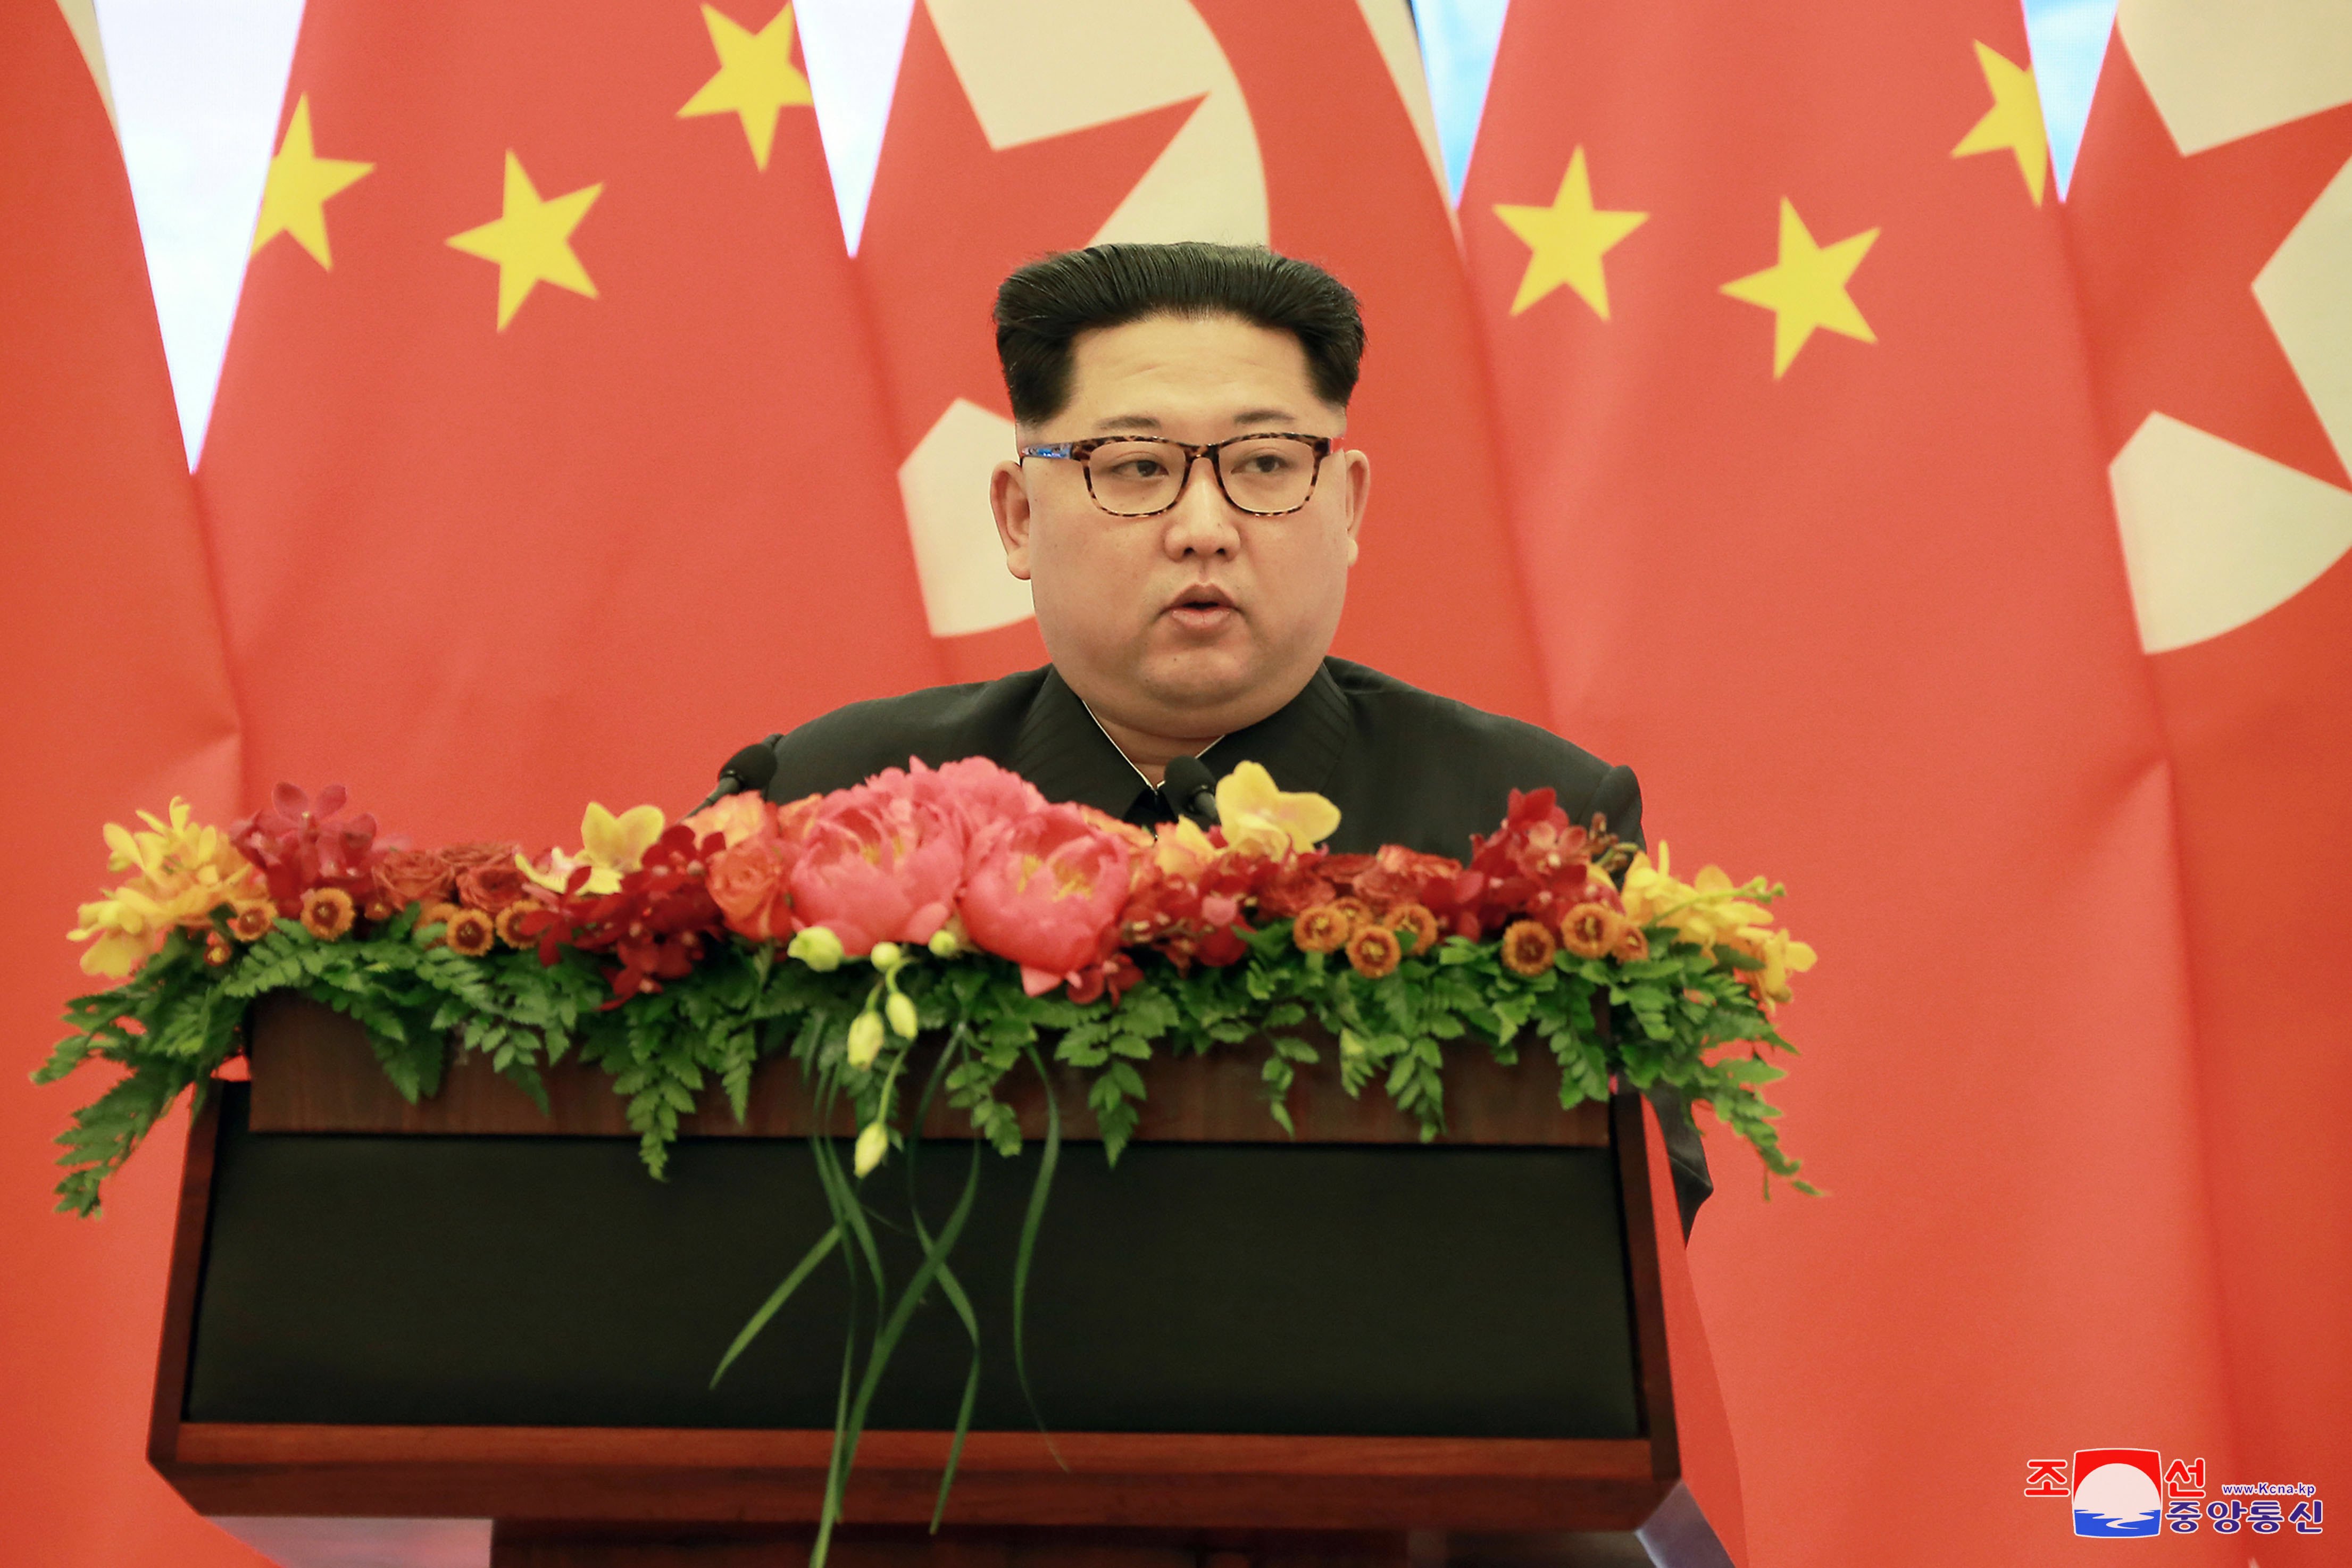 epa06633534 An undated photo released on 28 March 2018 by the North Korean Central News Agency (KCNA), the state news agency of North Korea, shows North Korean leader Kim Jong-un giving a speech during a visit to China. According to the North Korean media, Kim Jong-un visited China from 25 to 28 March at the invitation of Chinese President Xi Jinping.  EPA/KCNA   EDITORIAL USE ONLY